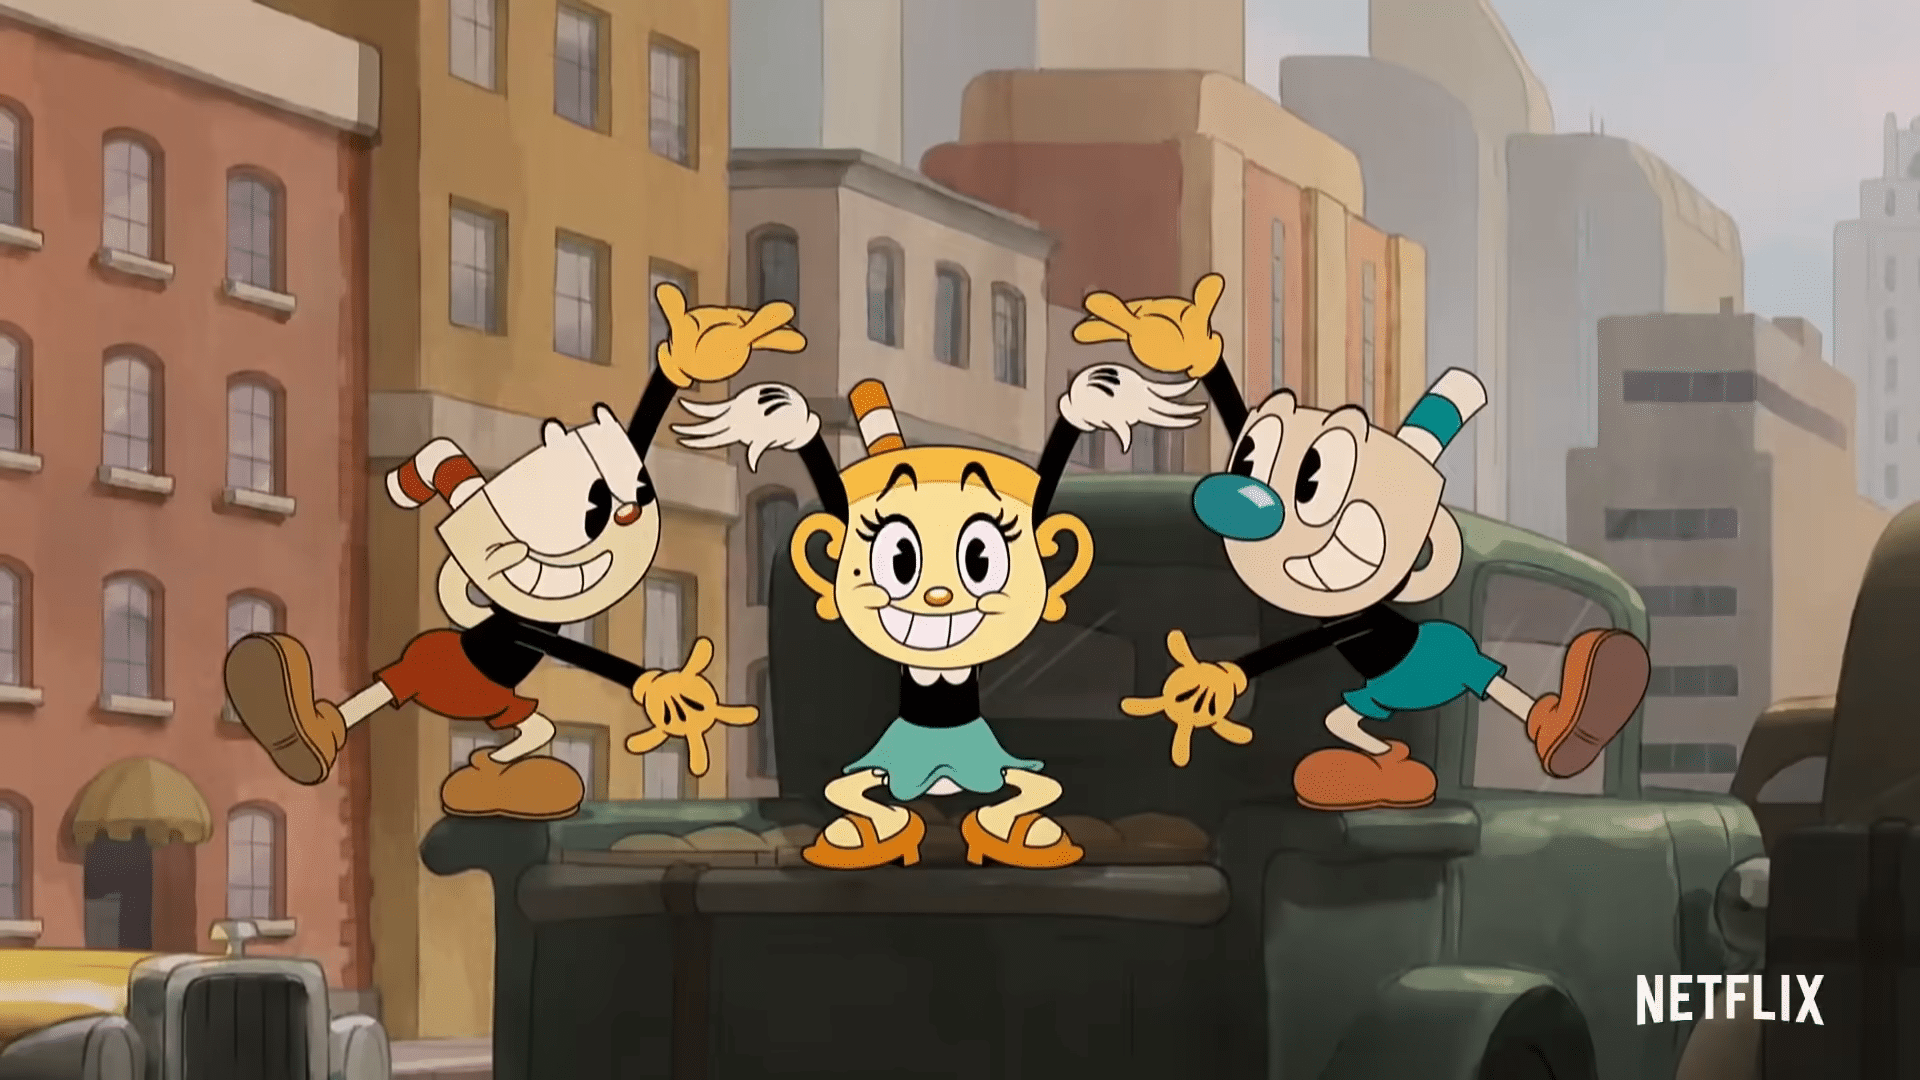 Cuphead Netflix Show Receives Captivating & Charming Trailer; February Release